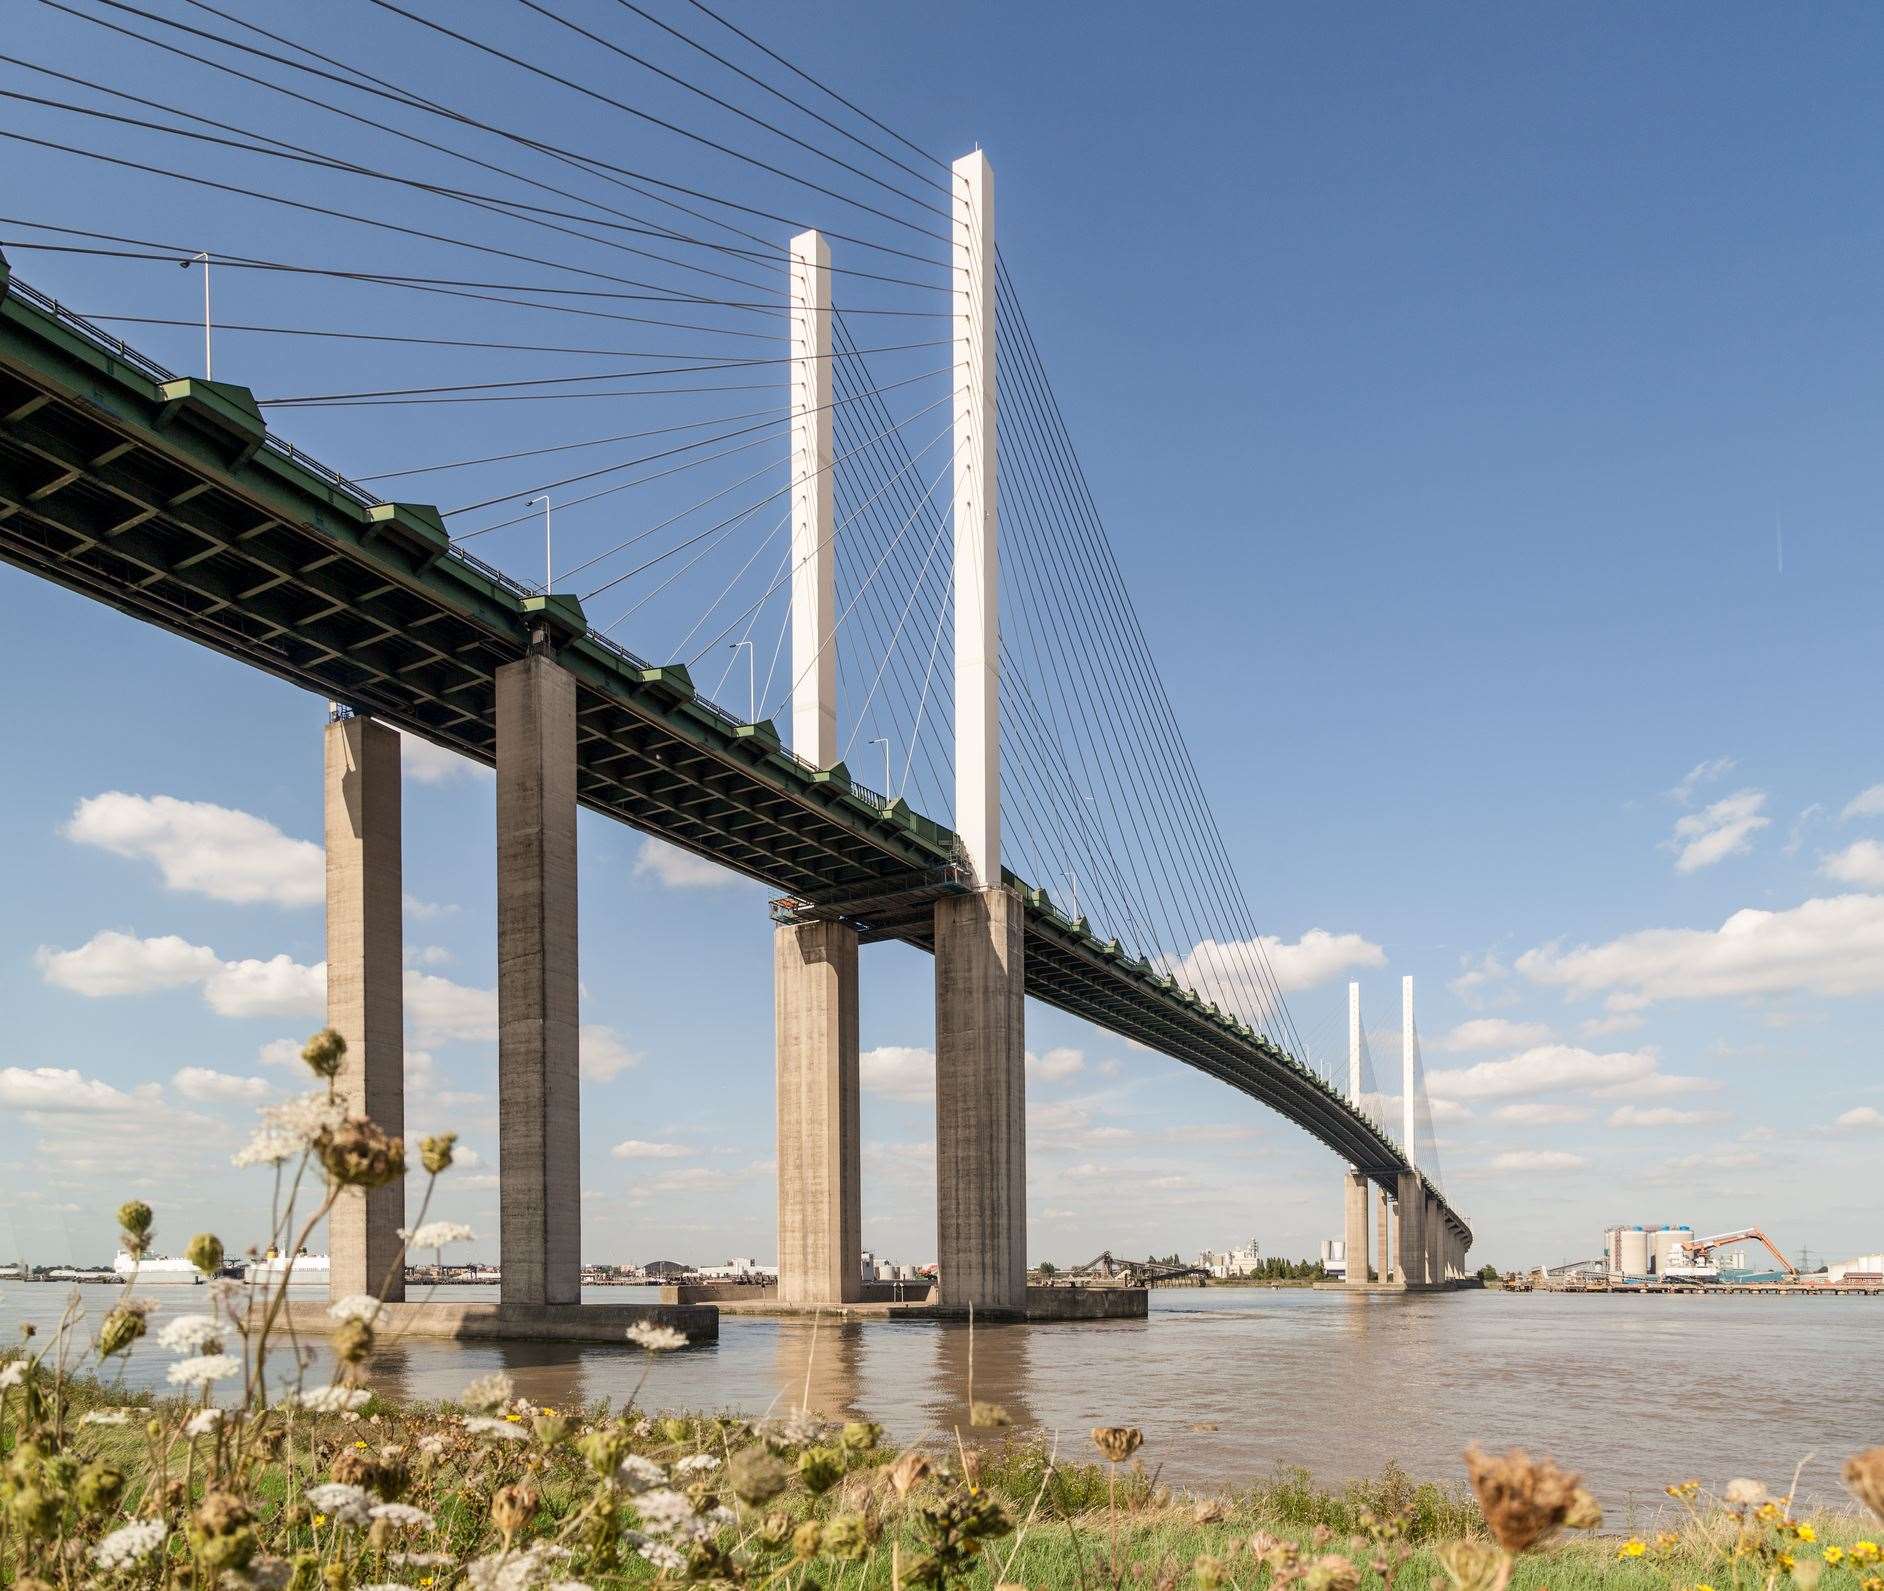 The QEII Bridge over the River Thames is one of the UK's busiest crossings